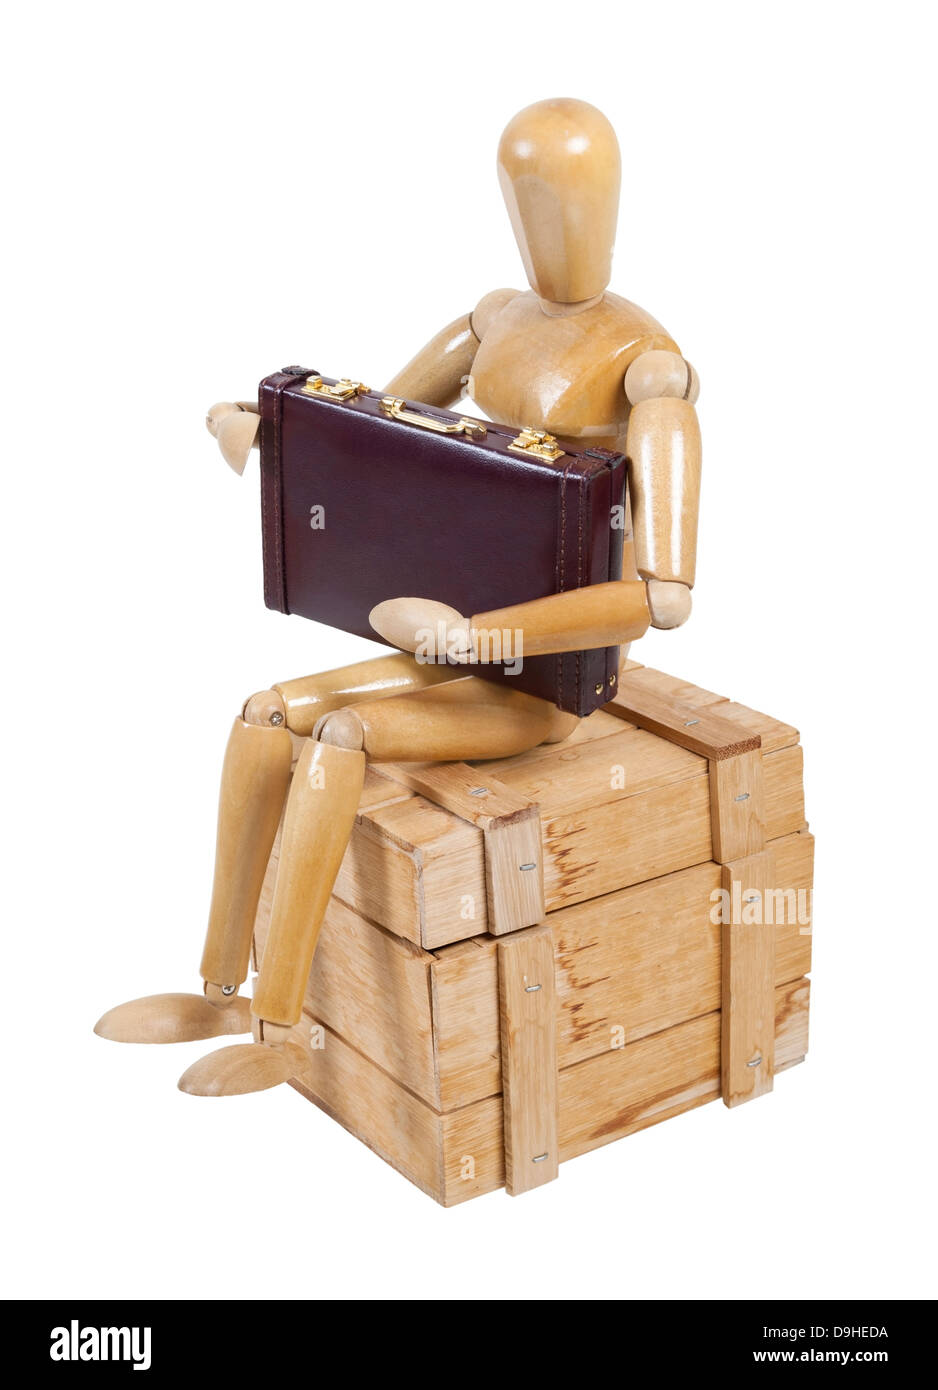 Employee holding briefcase on wooden crate used to protect cargo while being shipped Stock Photo